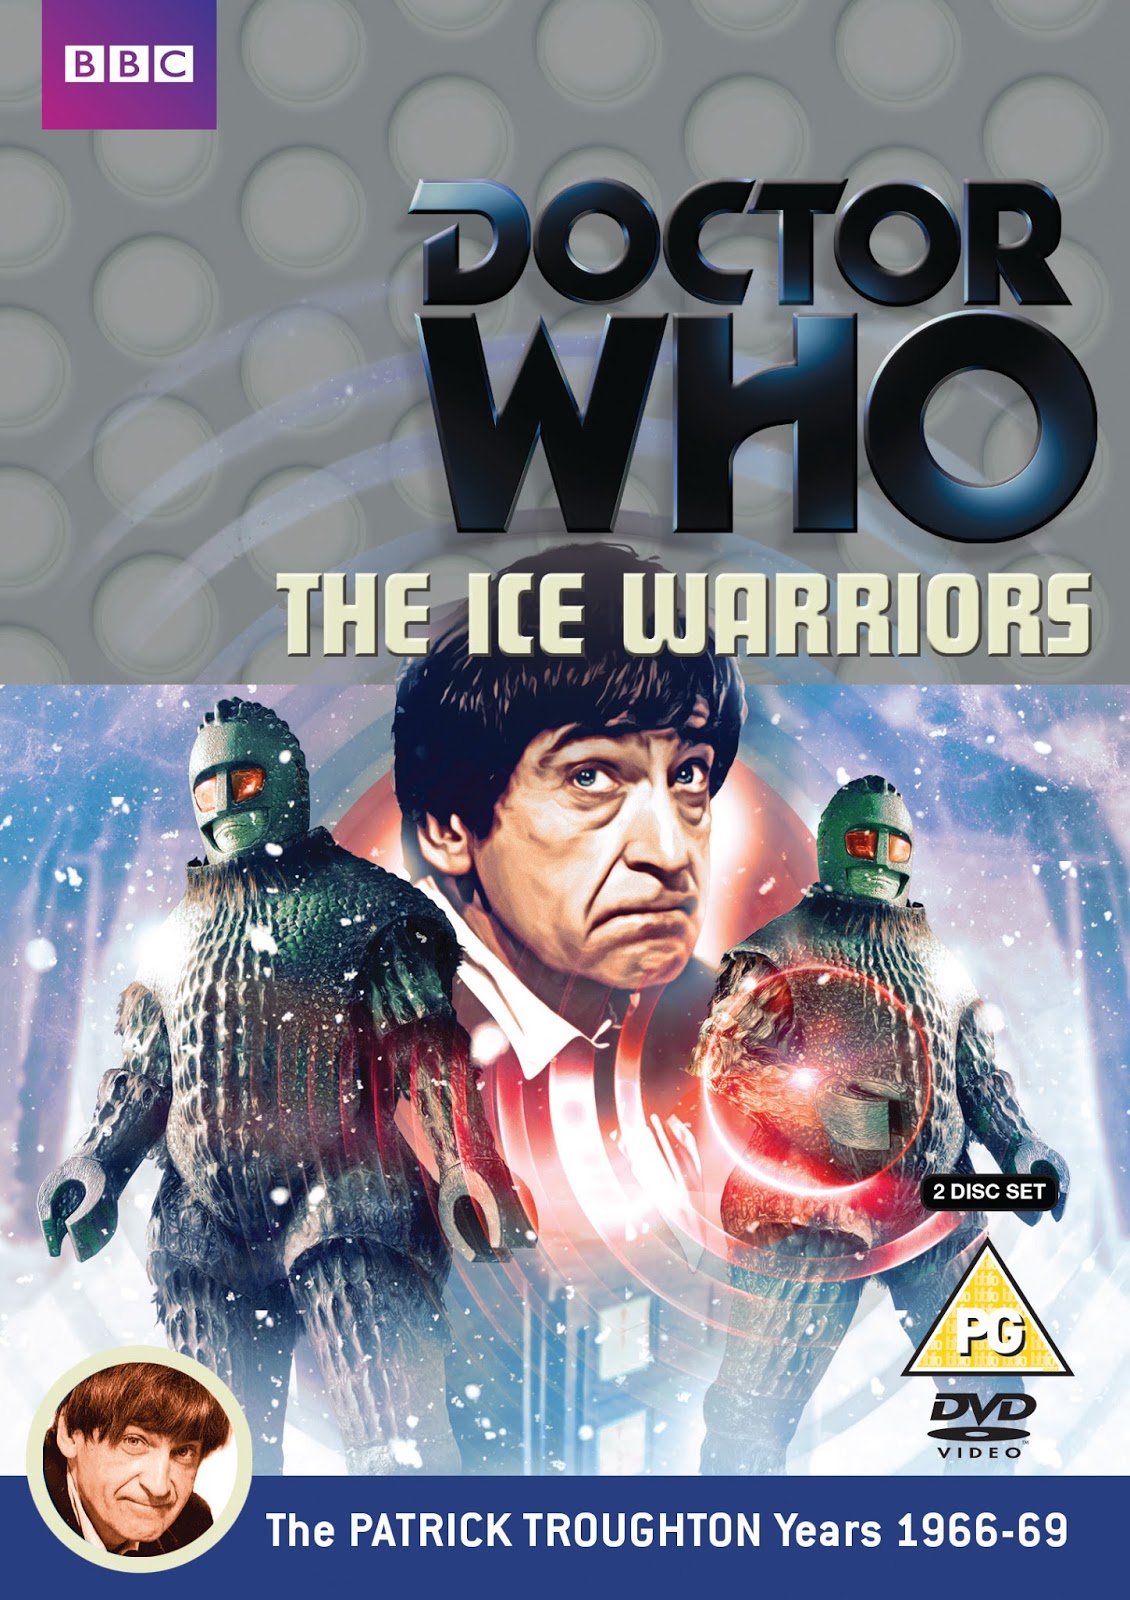 The Ice Warriors | Doctor Who DVD Special Features Index Wiki | Fandom